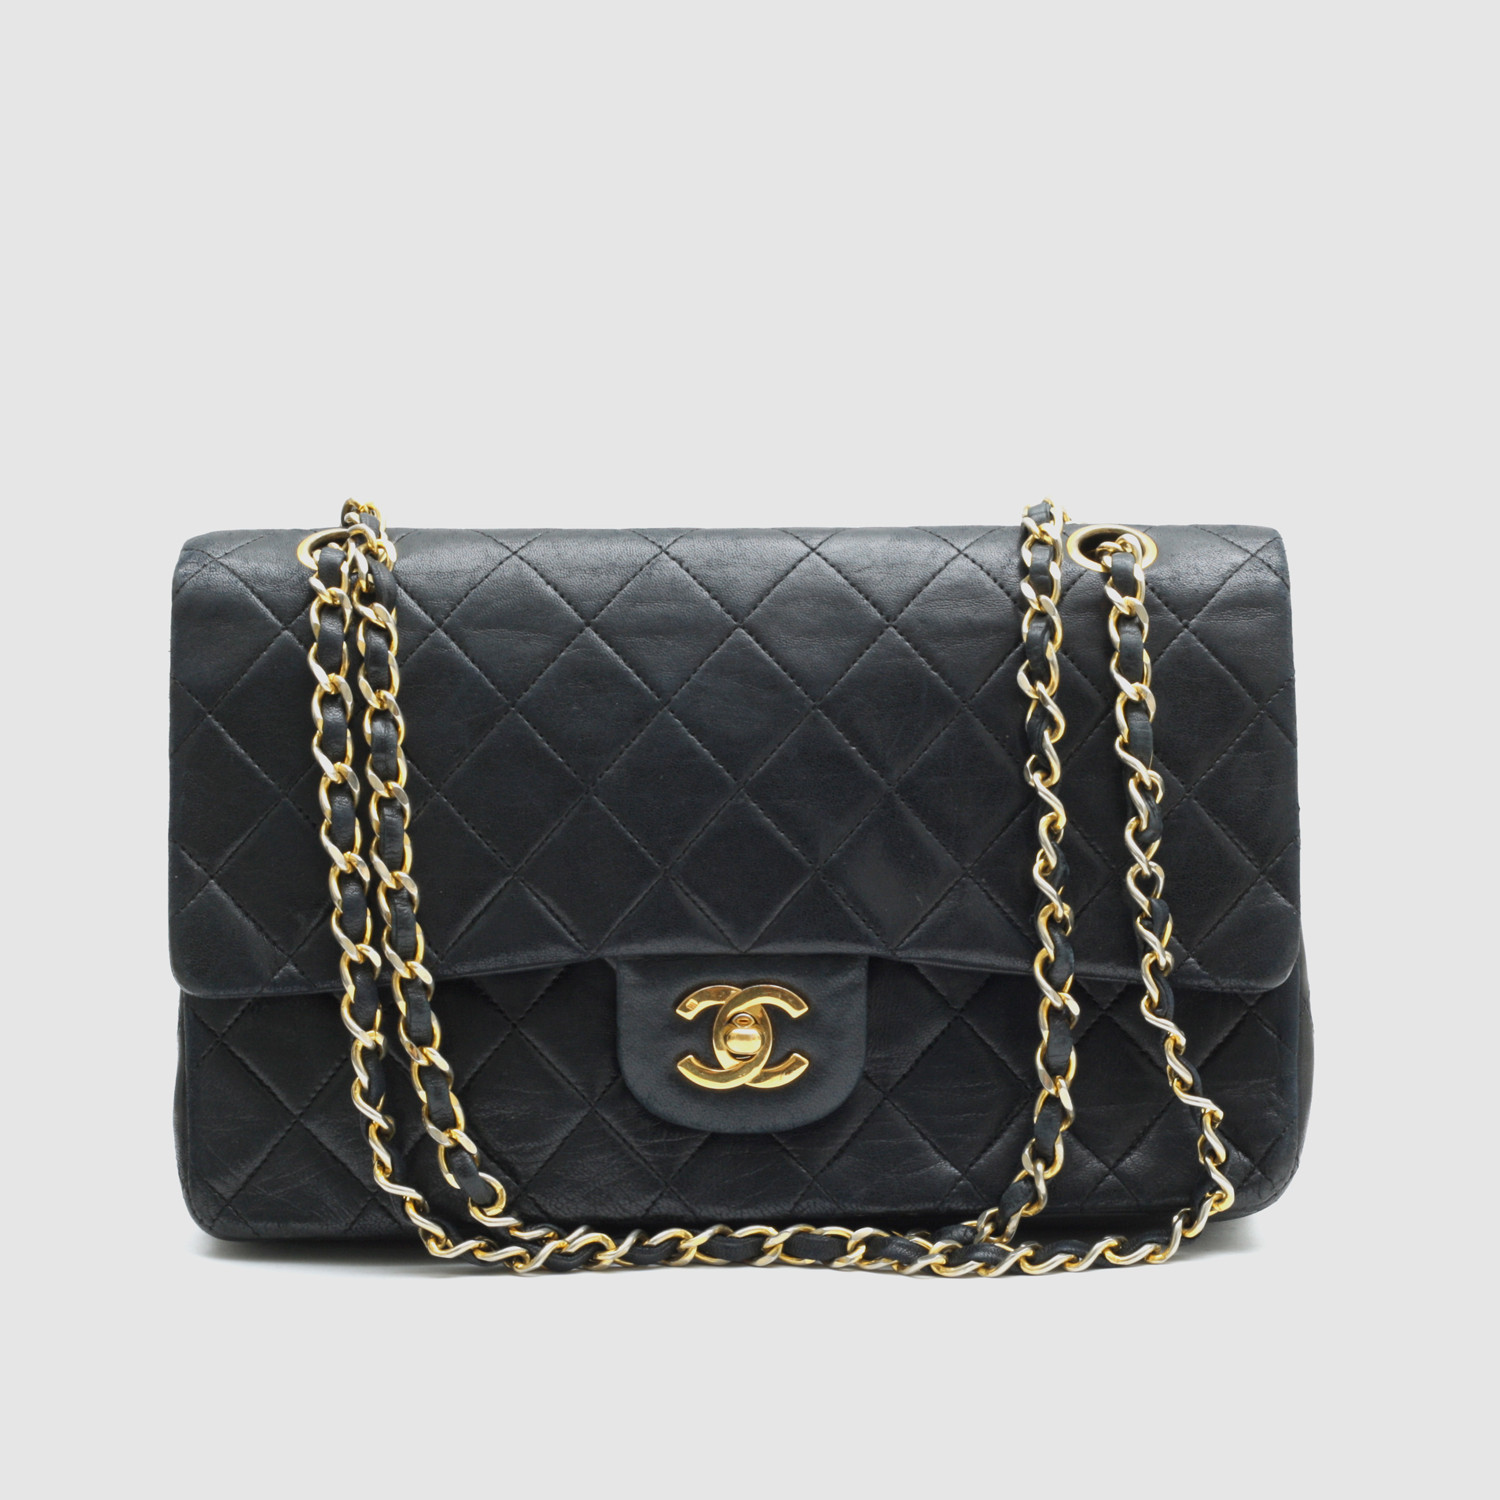 Chanel Classic Flap Bag // Black Quilted Lambskin - Vintage Luxury Handbags - Touch of Modern